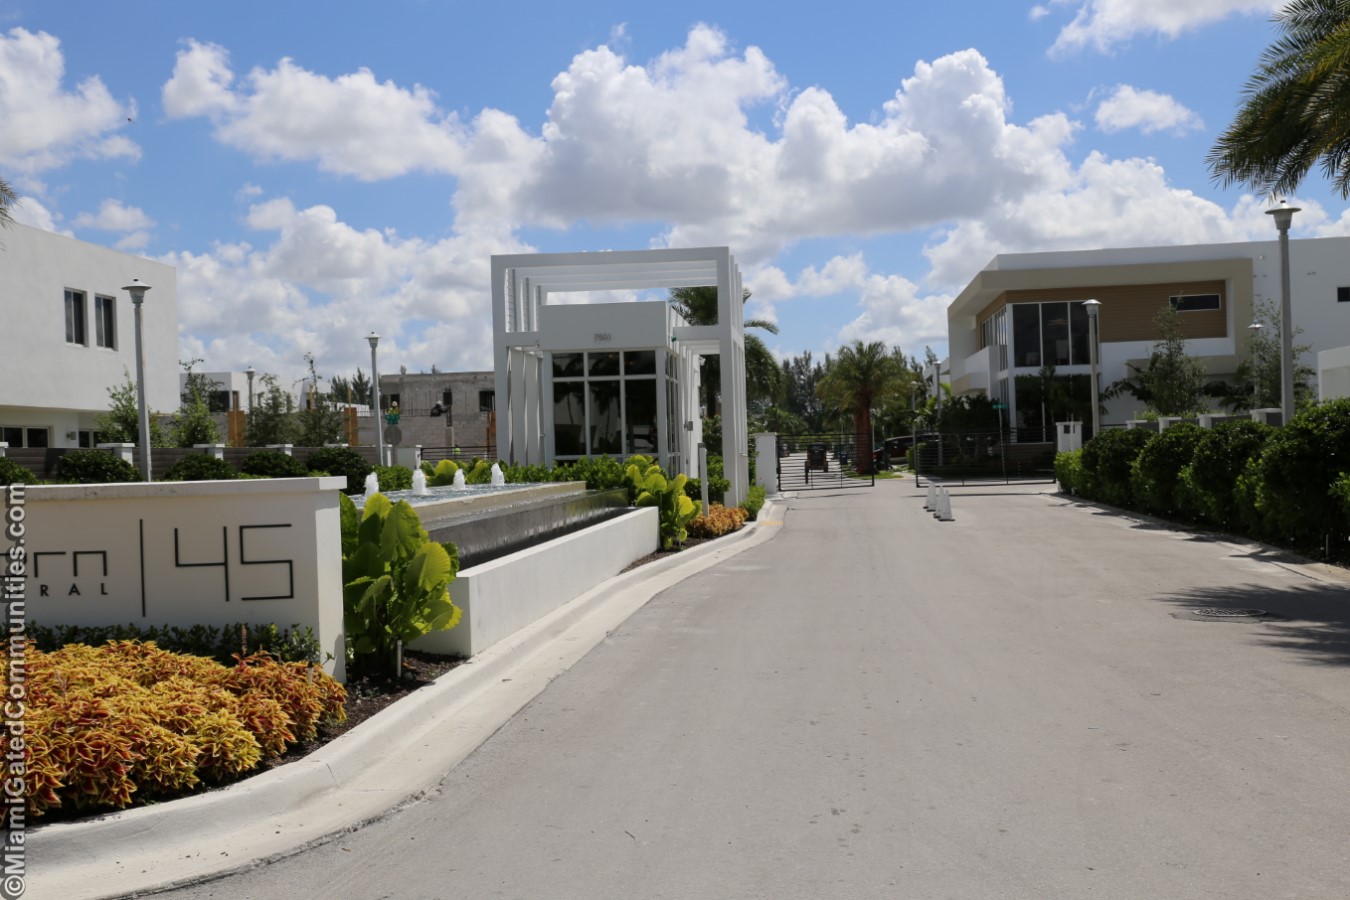 Miami Gated Communities - Miami Realtors, buying Coral Gables homes,  selling Coral Gables homes, Council of Residential Specialists